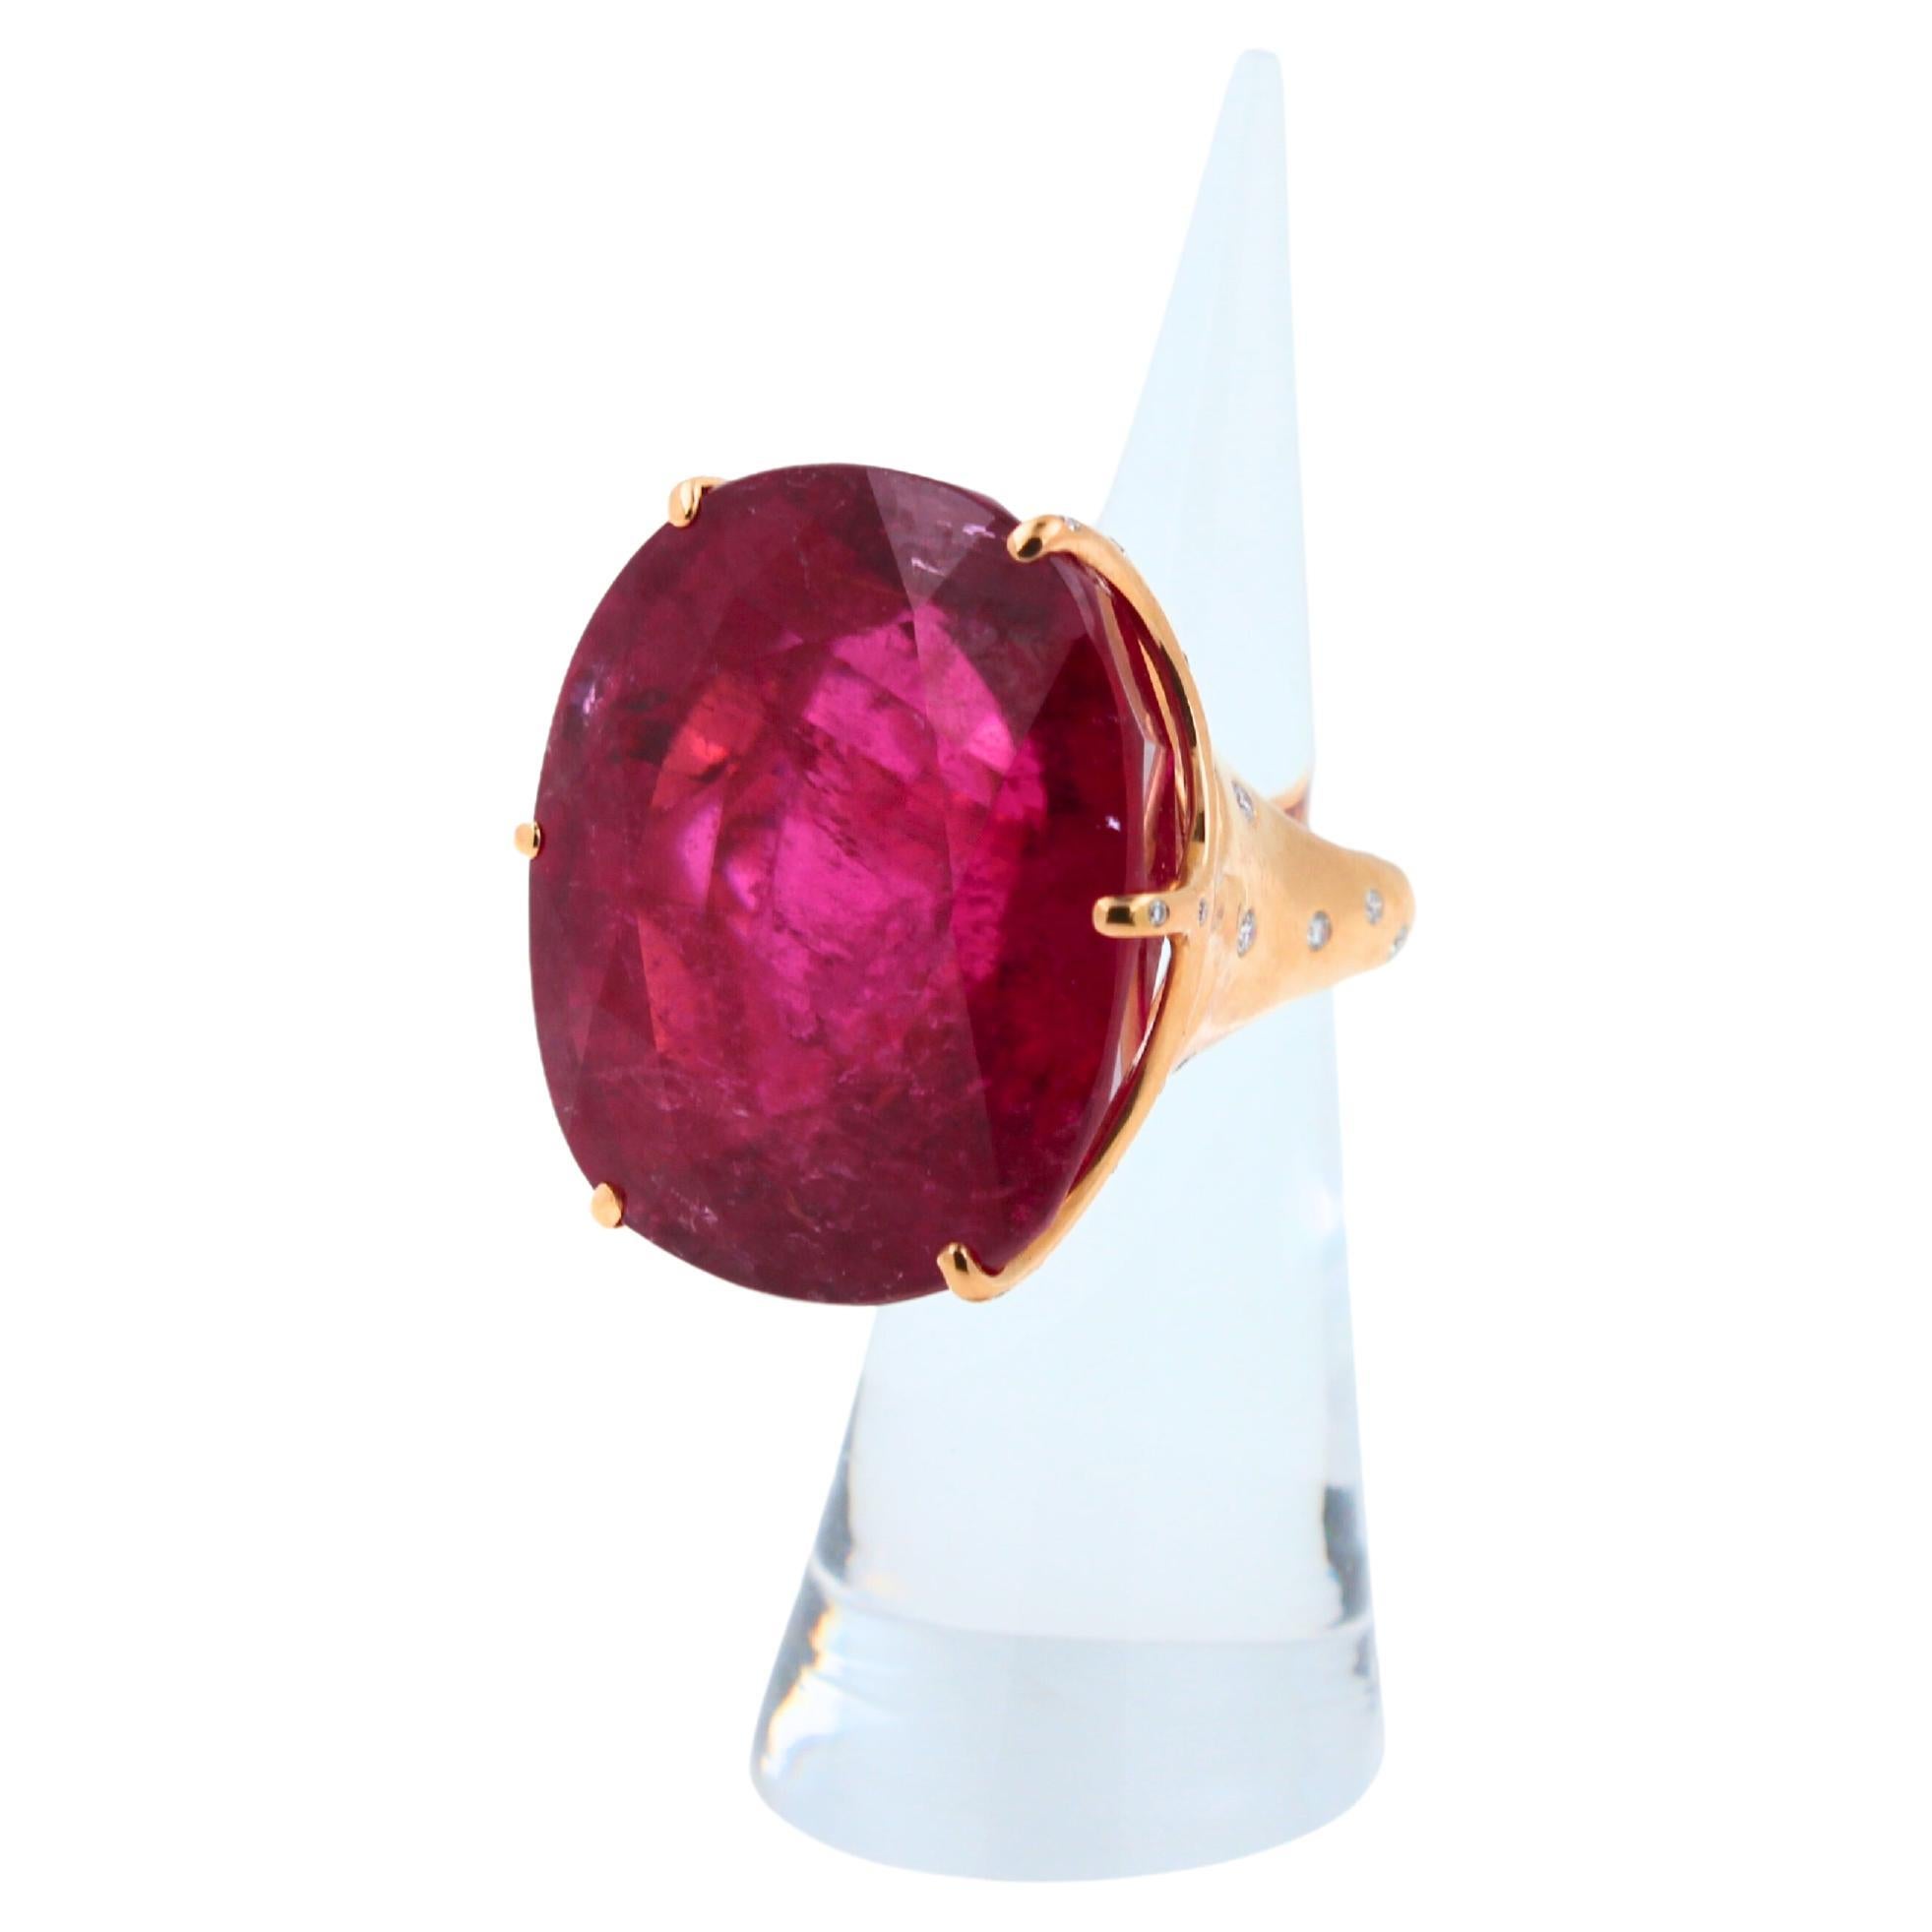 Huge Unique 110 Carats Red Pink Maroon Rubellite 18k Rose Gold Diamond Ring For Sale 4